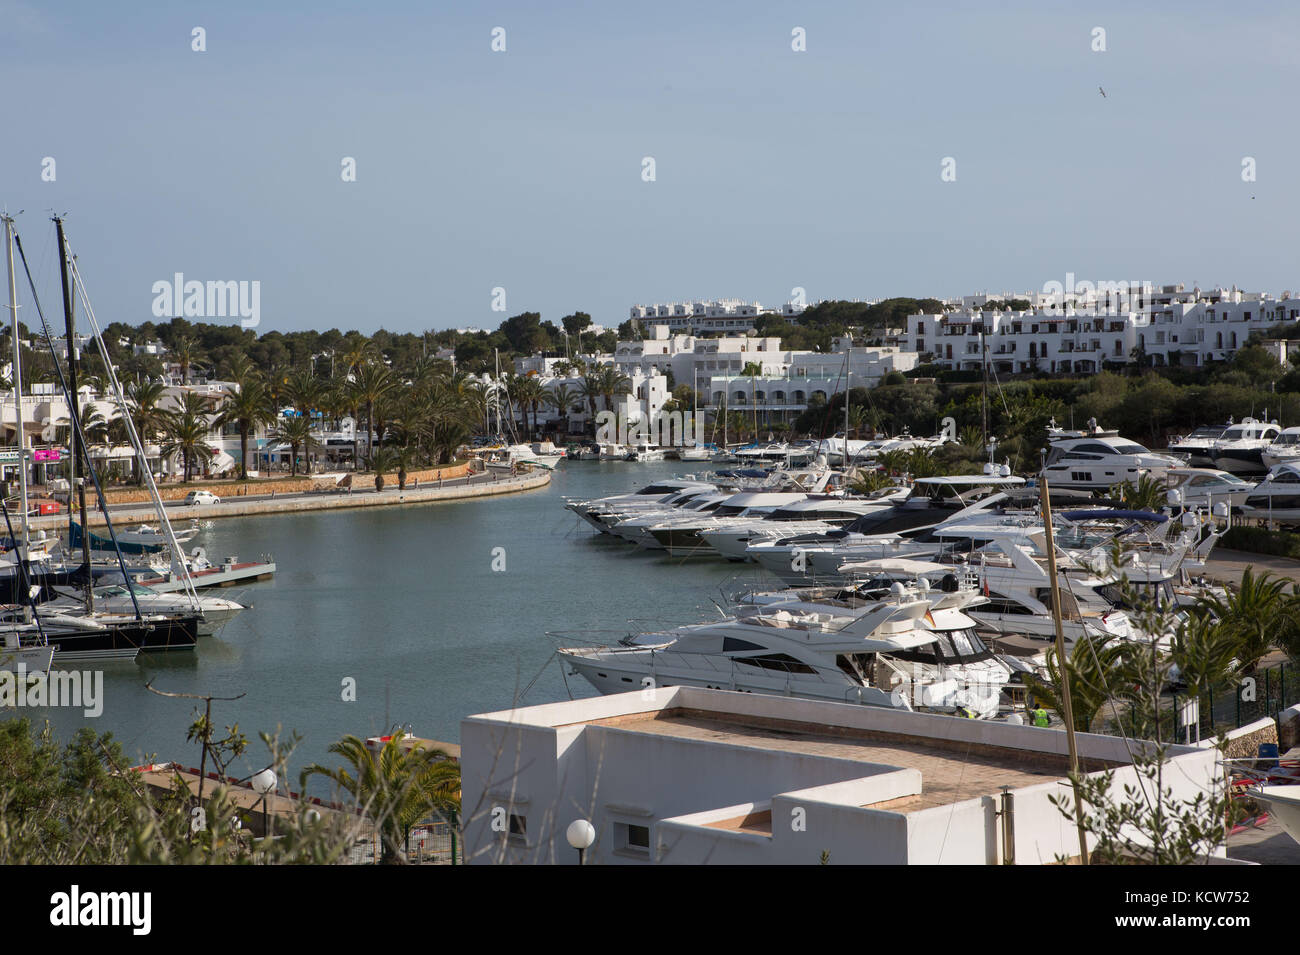 View from above of yachts moored in Marina De Cala D'Or, Cala d'Or, Majorca, Balearic Islands, Spain. Stock Photo